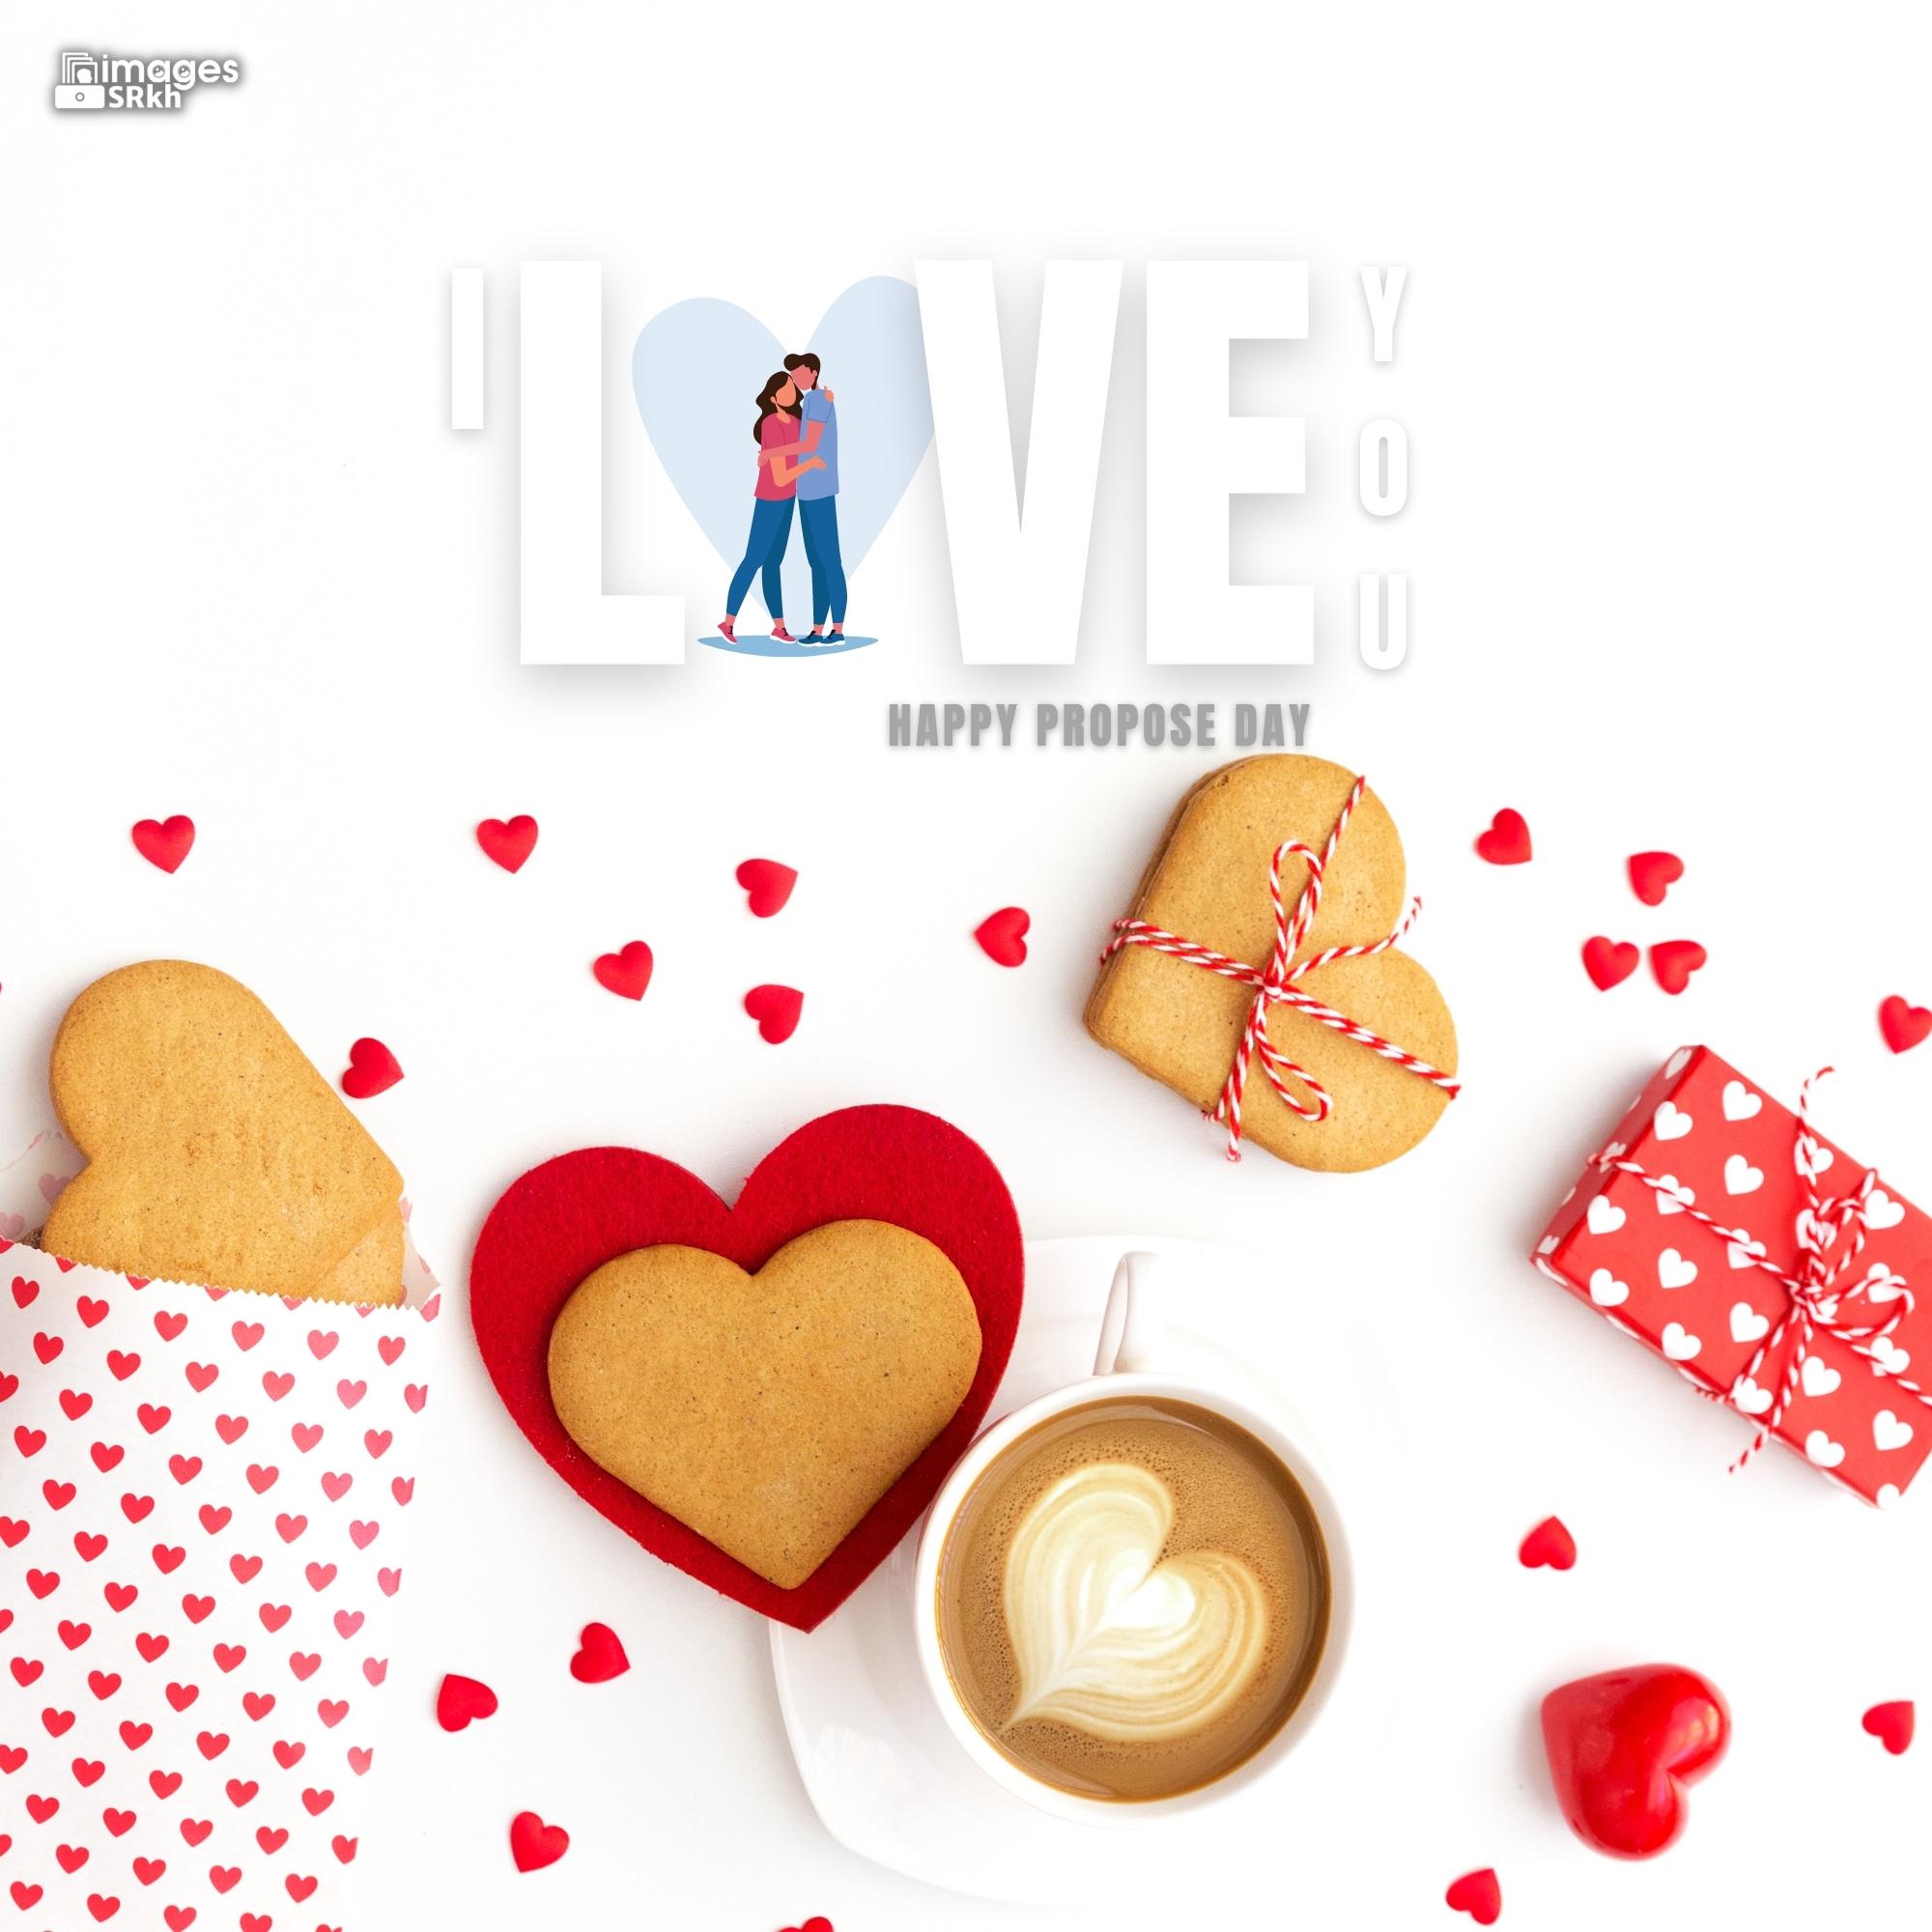 Happy Propose Day Images | 419 | I LOVE YOU